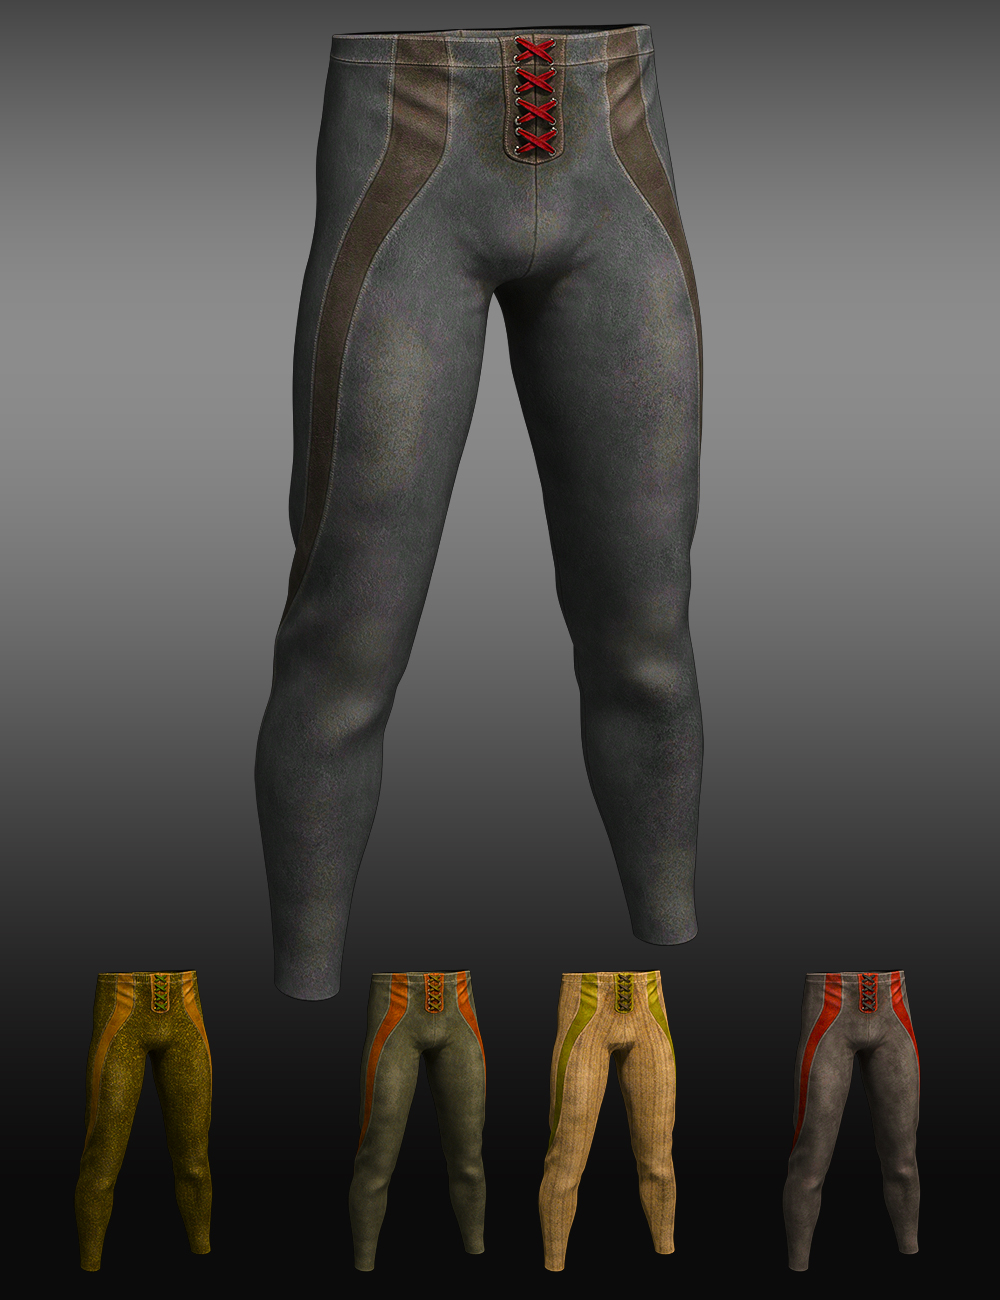 Iron Scale Armor Outfit Pants for Genesis 8 and 8.1 Males by: Barbara BrundonUmblefuglyArien, 3D Models by Daz 3D